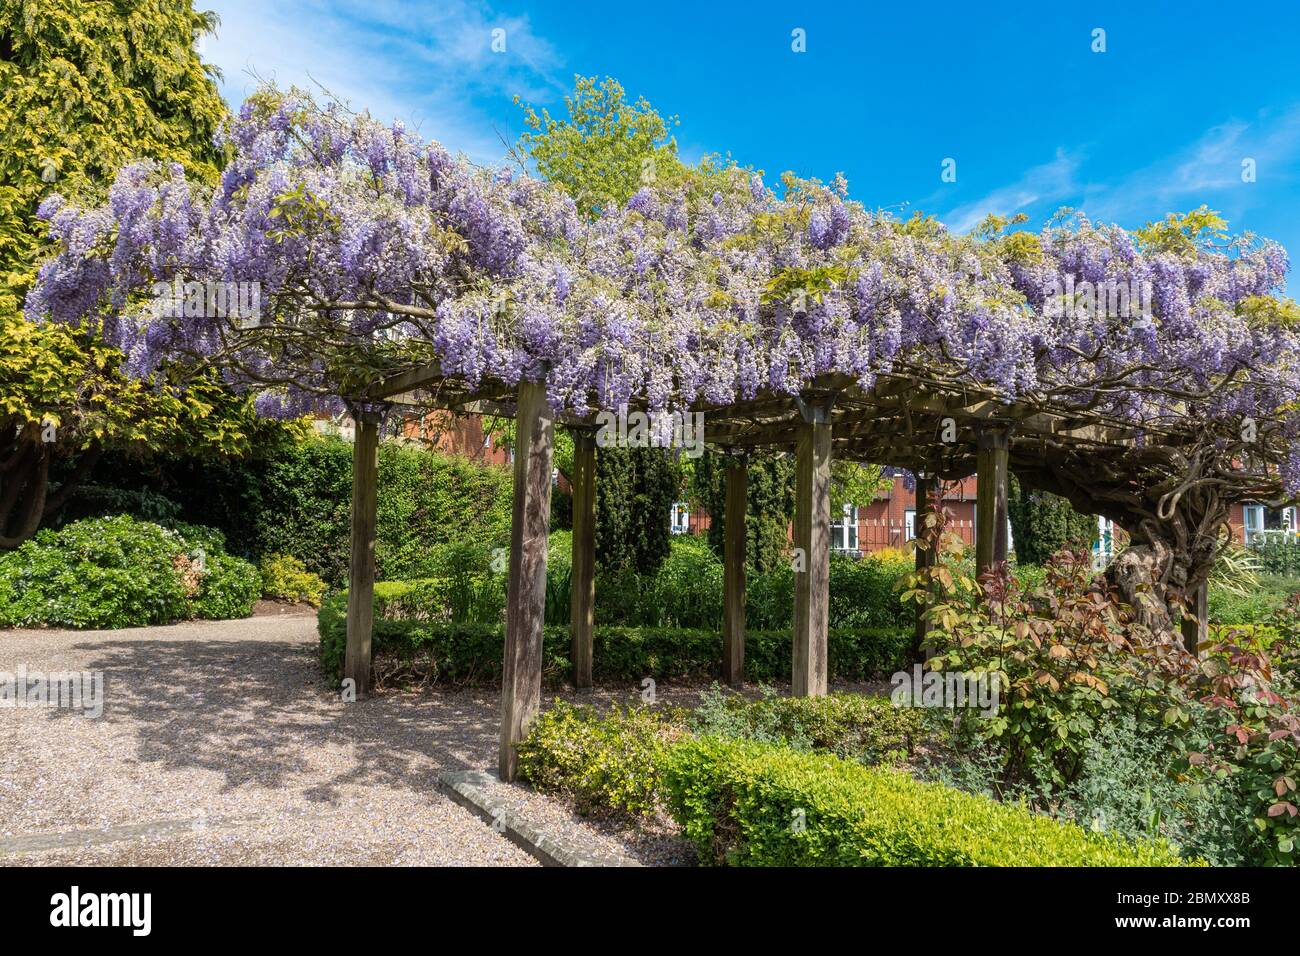 Wisteria covered pergola in flower in the Municipal Gardens in the Hampshire town of Aldershot during May, UK Stock Photo